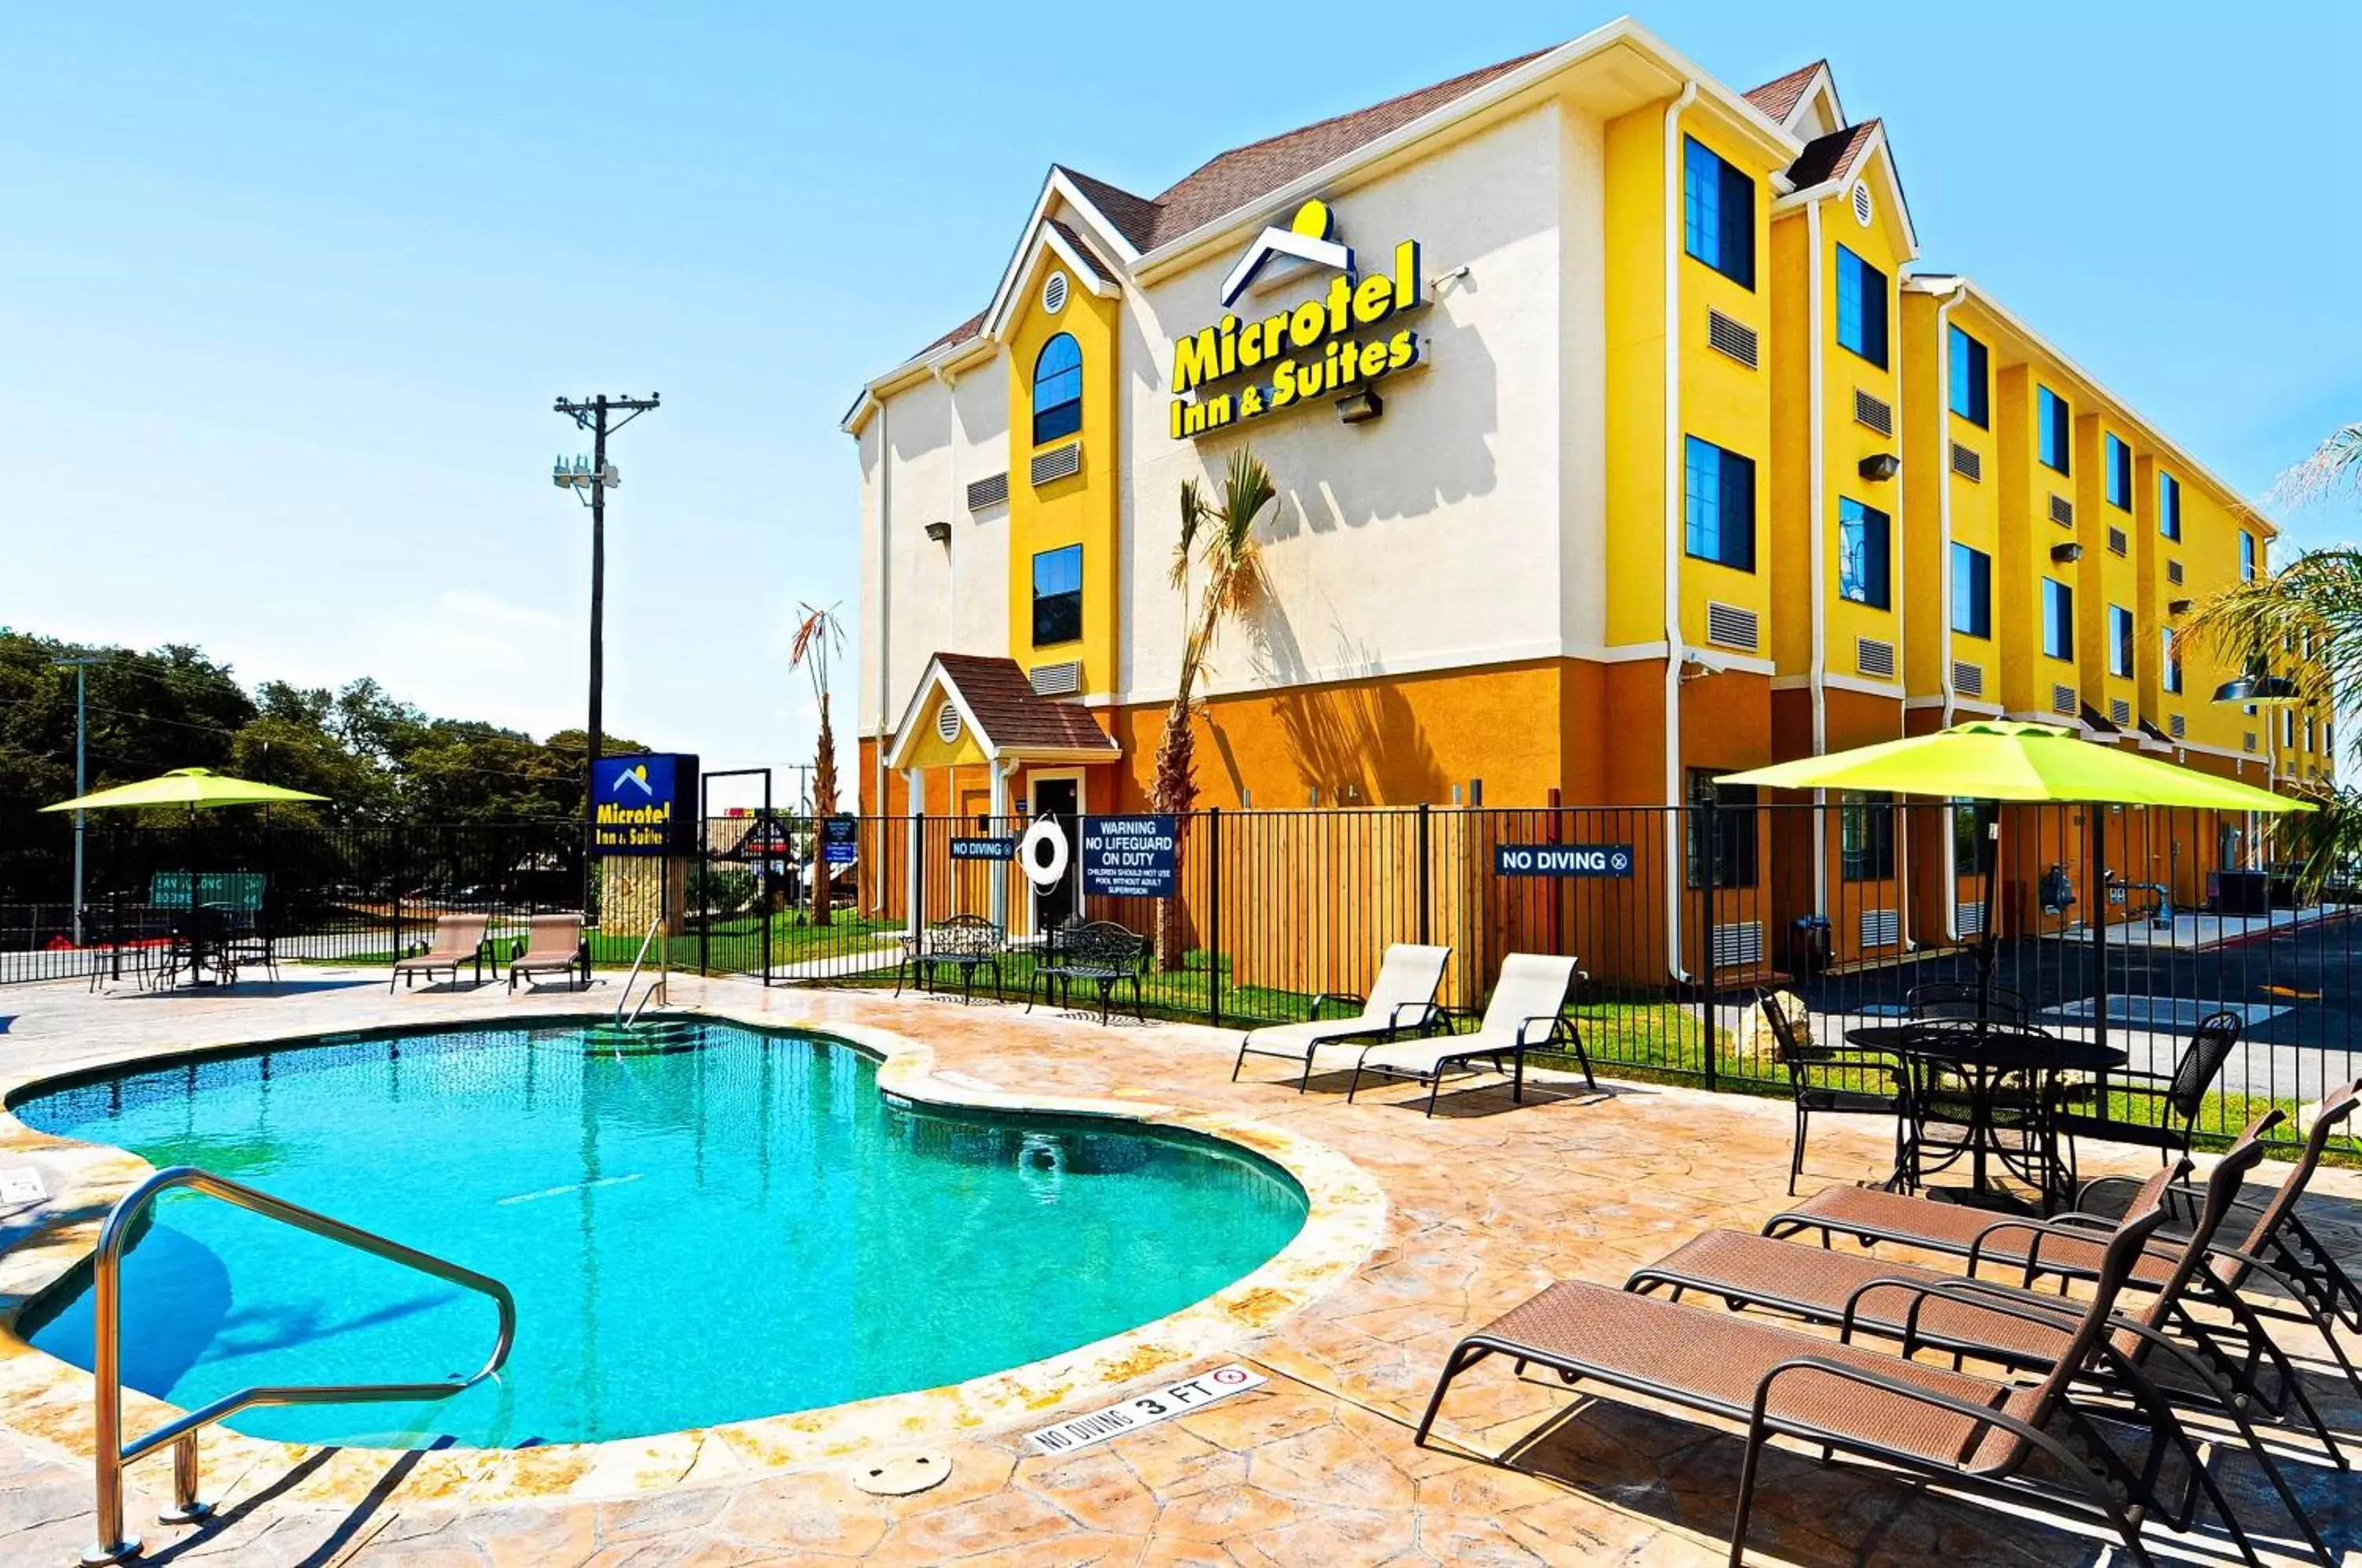 Facade/entrance, Property Building in Microtel Inn & Suites by Wyndham New Braunfels I-35